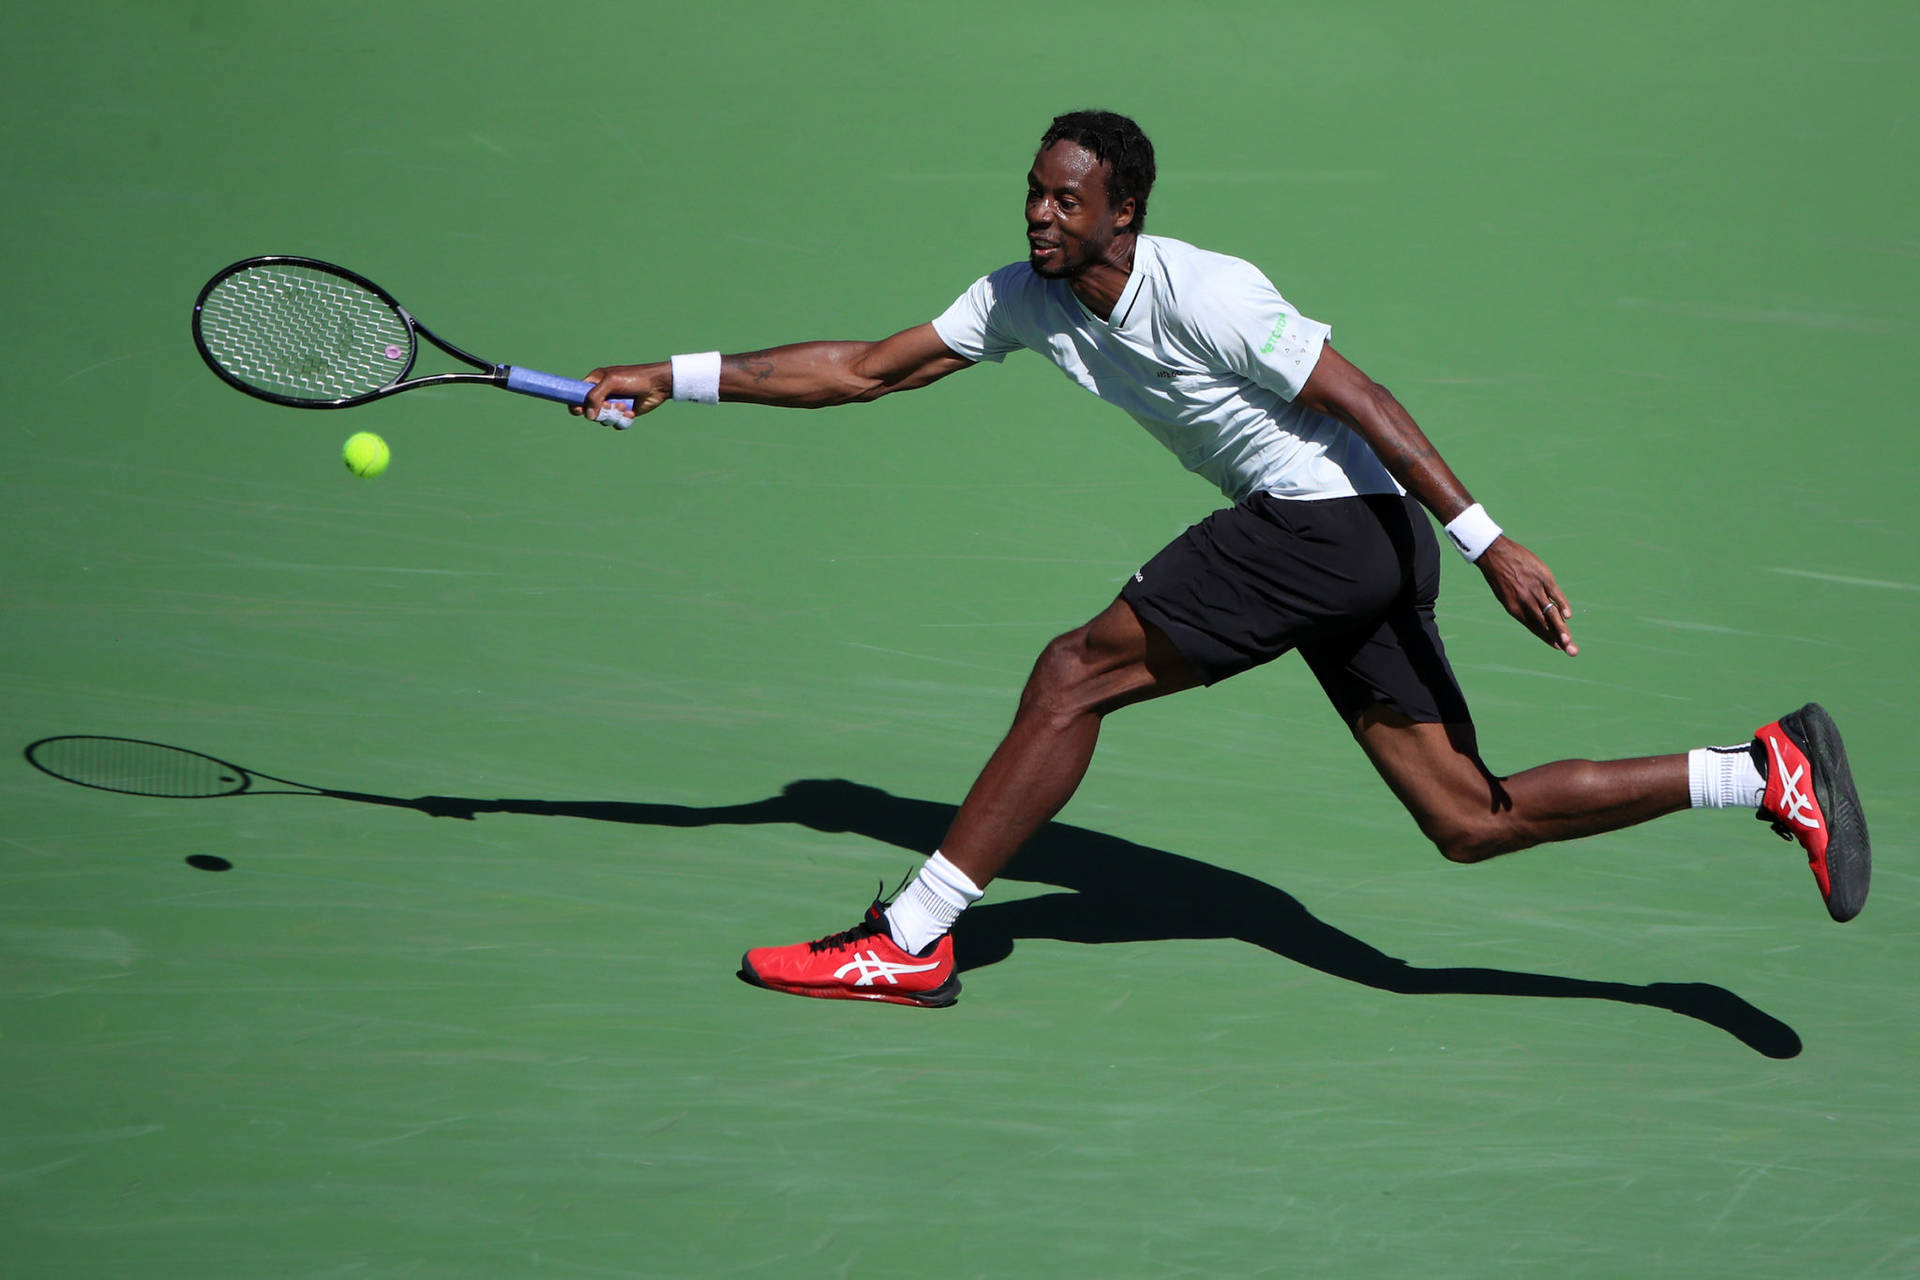 Download Gael Monfils in Action - An Extraordinary Athletic Performance ...